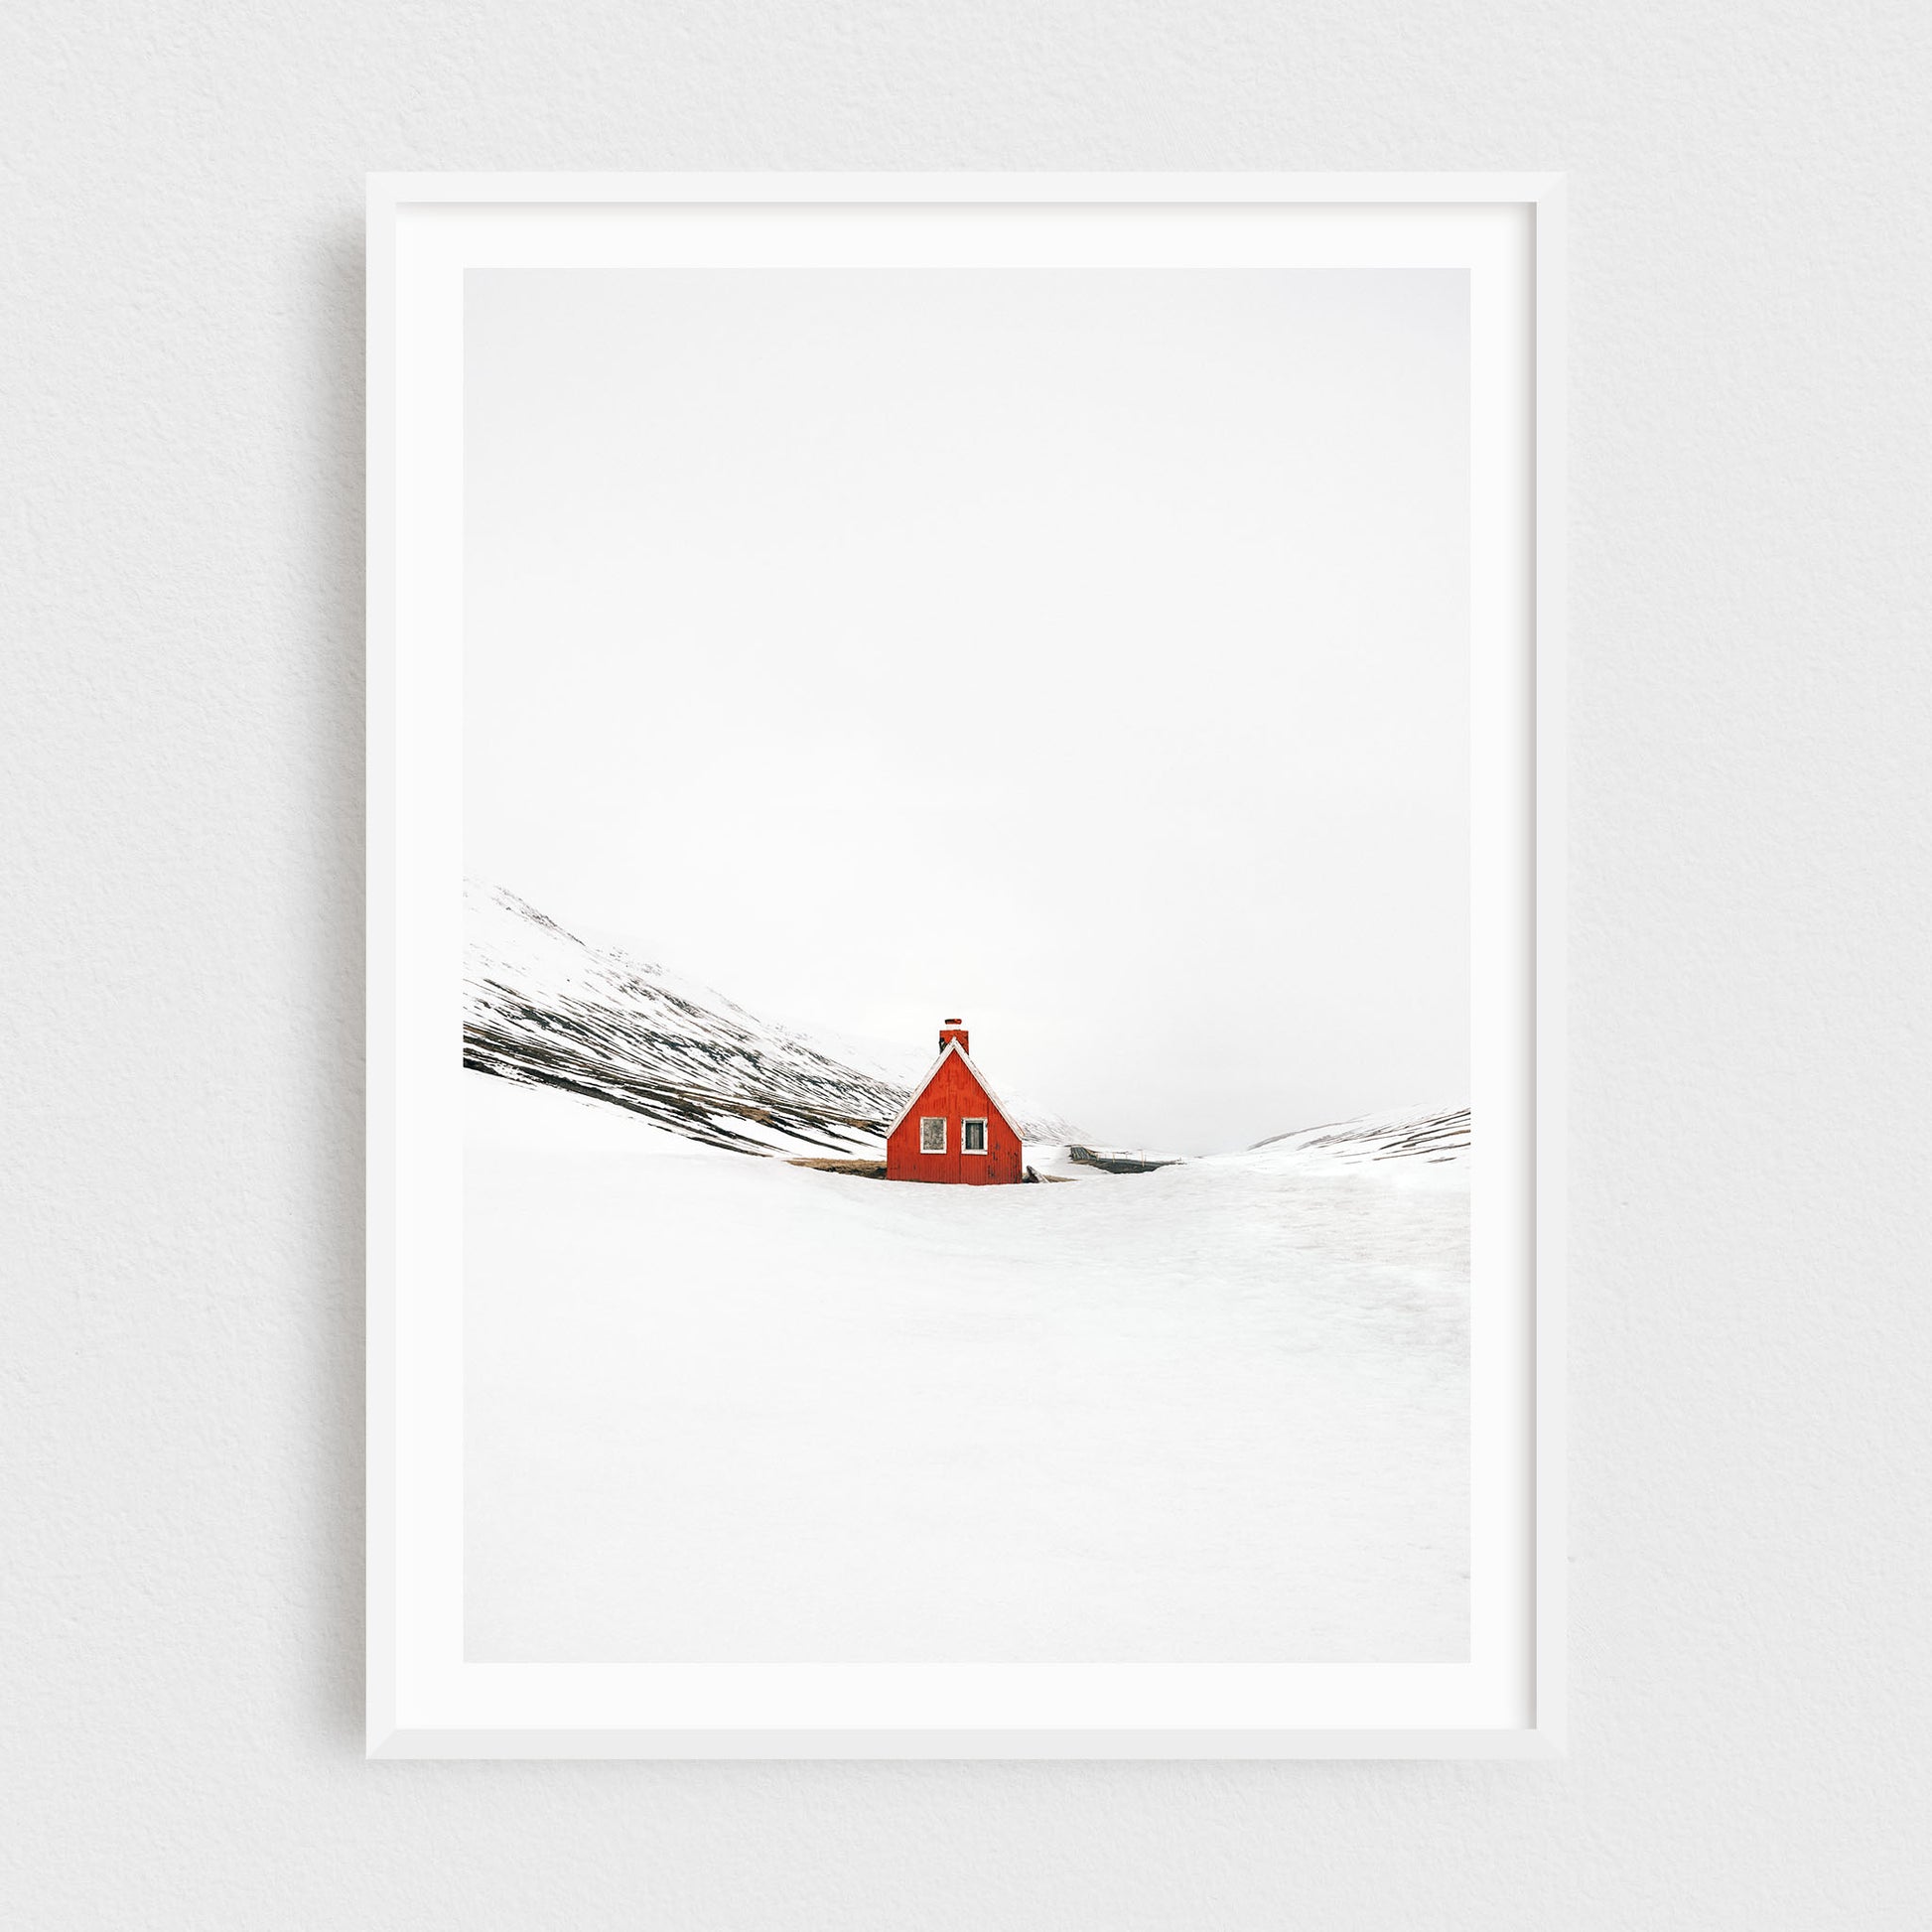 Iceland fine art photography print featuring a red cabin in winter, in a white frame